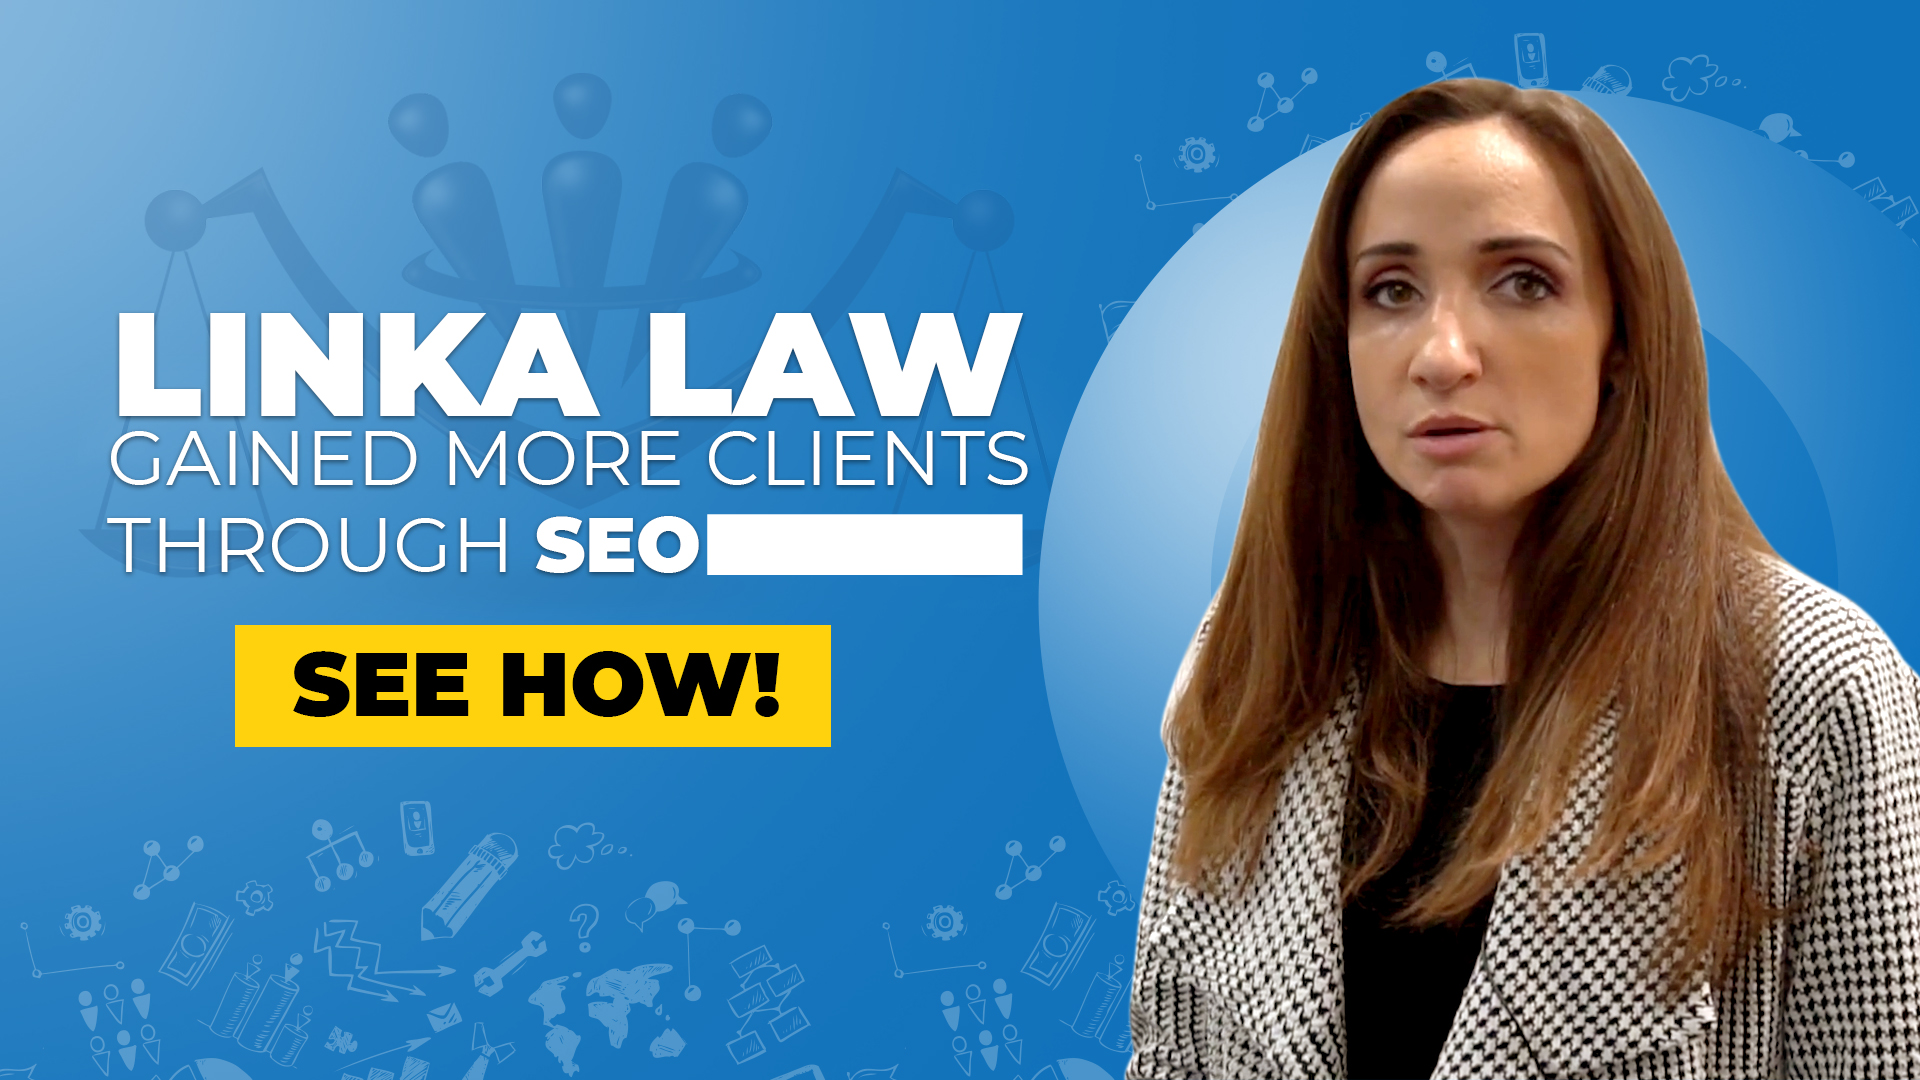 Linka Law Gained More Clients Through SEO